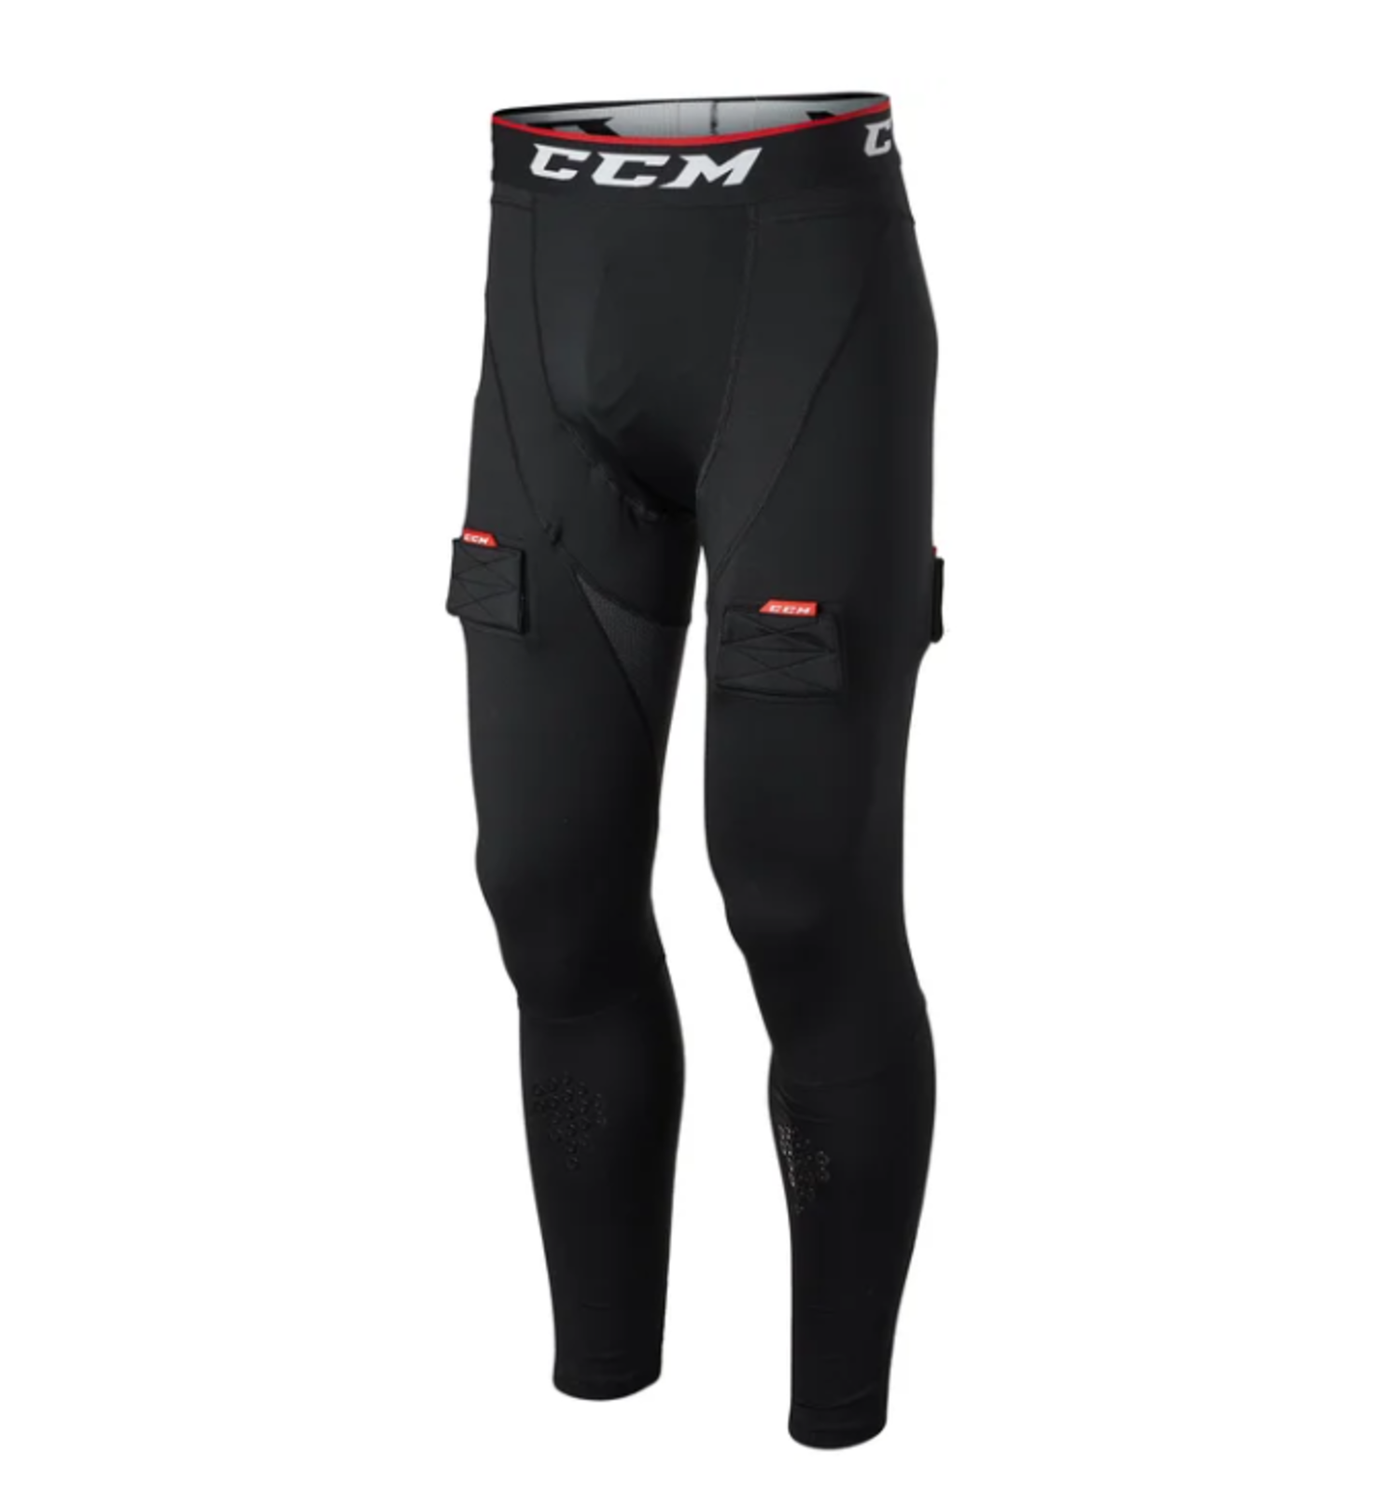 CCM Youth Compression Pant with Cup